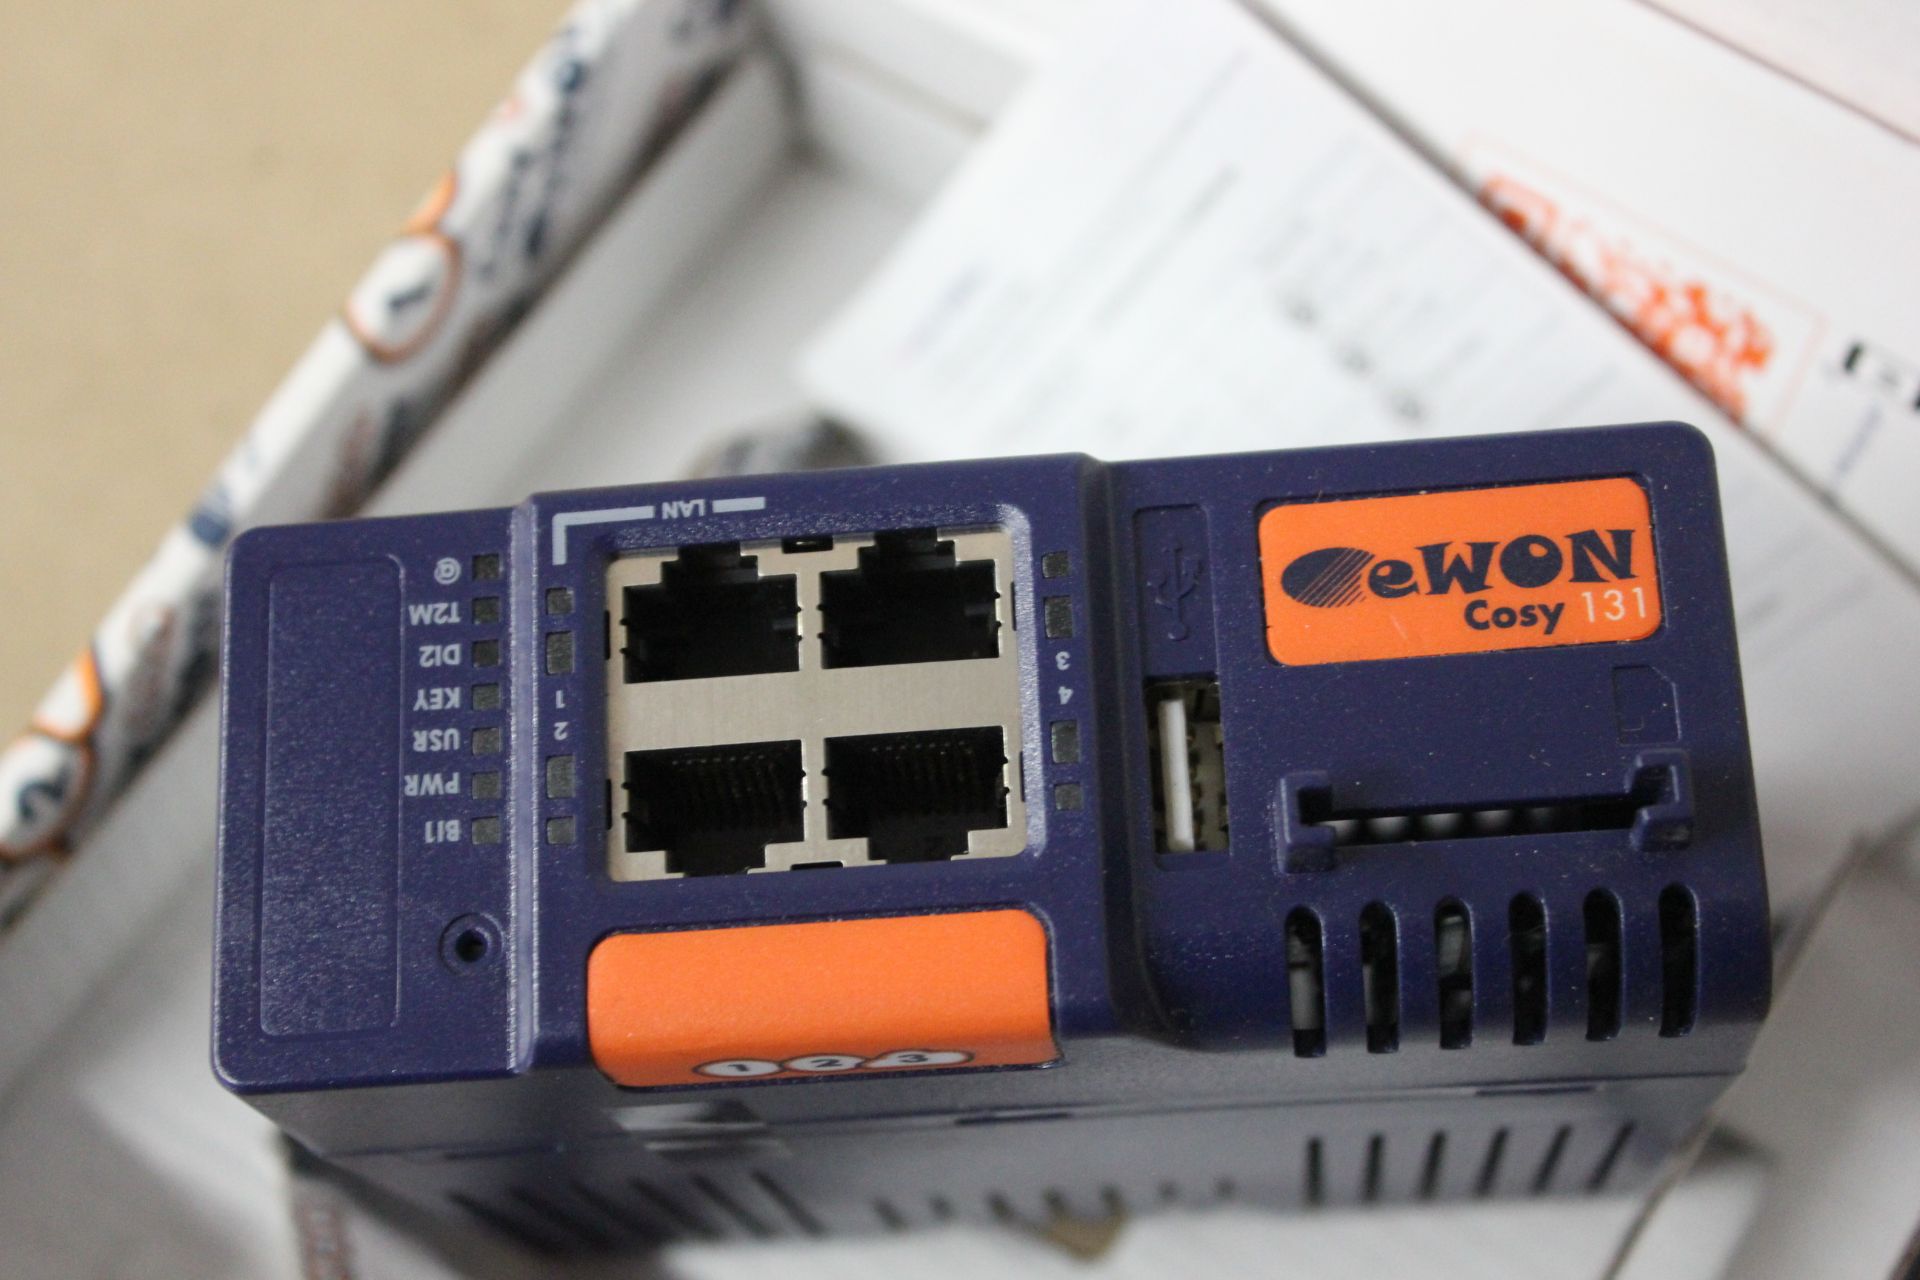 NEW EWON COSY INDUSTRIAL REMOTE ACCESS ROUTER - Image 4 of 5